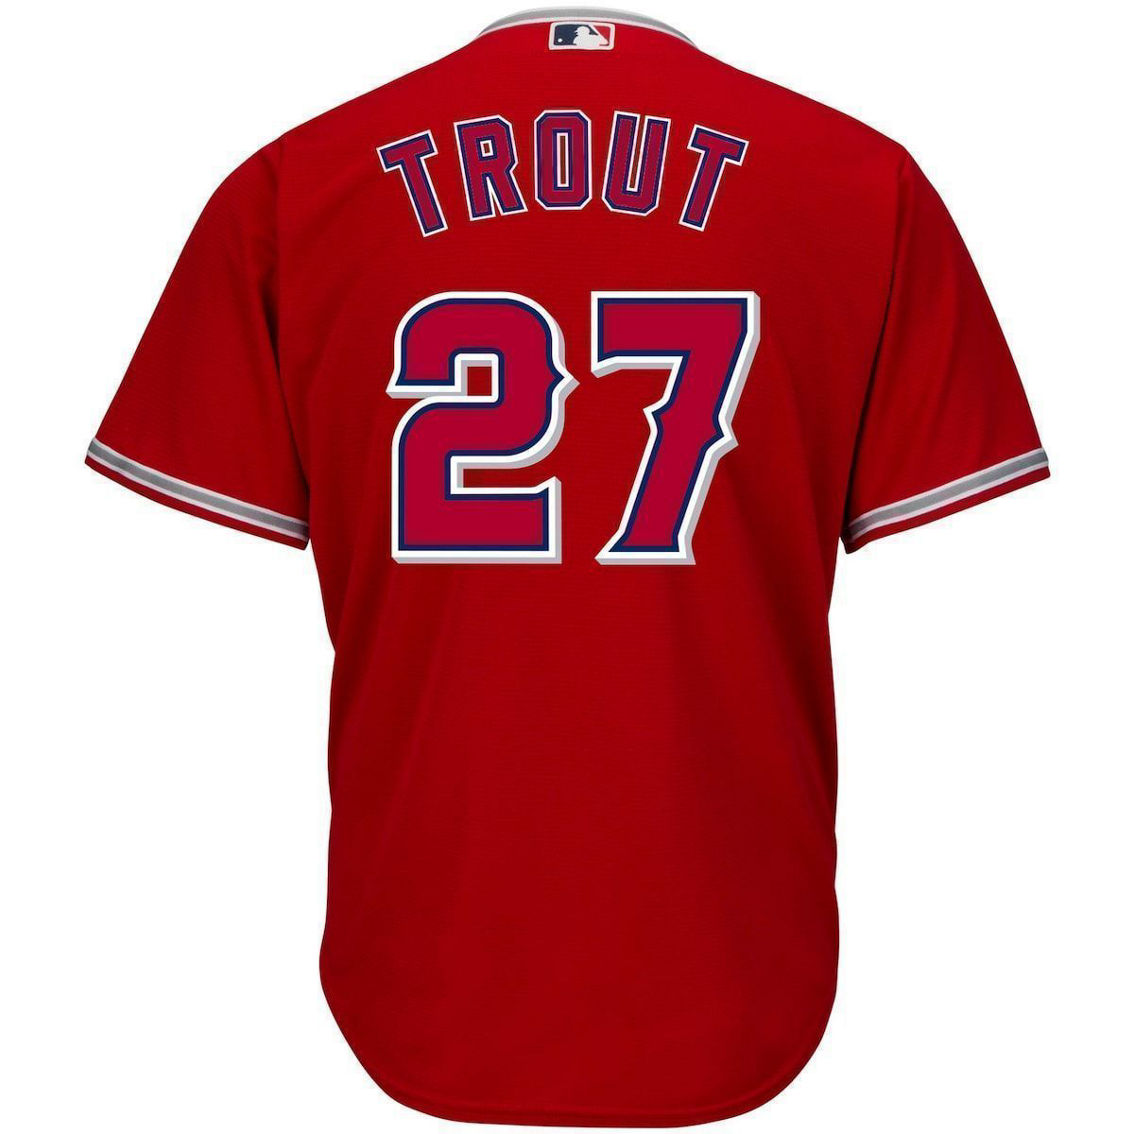 Profile Men's Mike Trout Red Los Angeles Angels Big & Tall Replica Player Jersey - Image 4 of 4